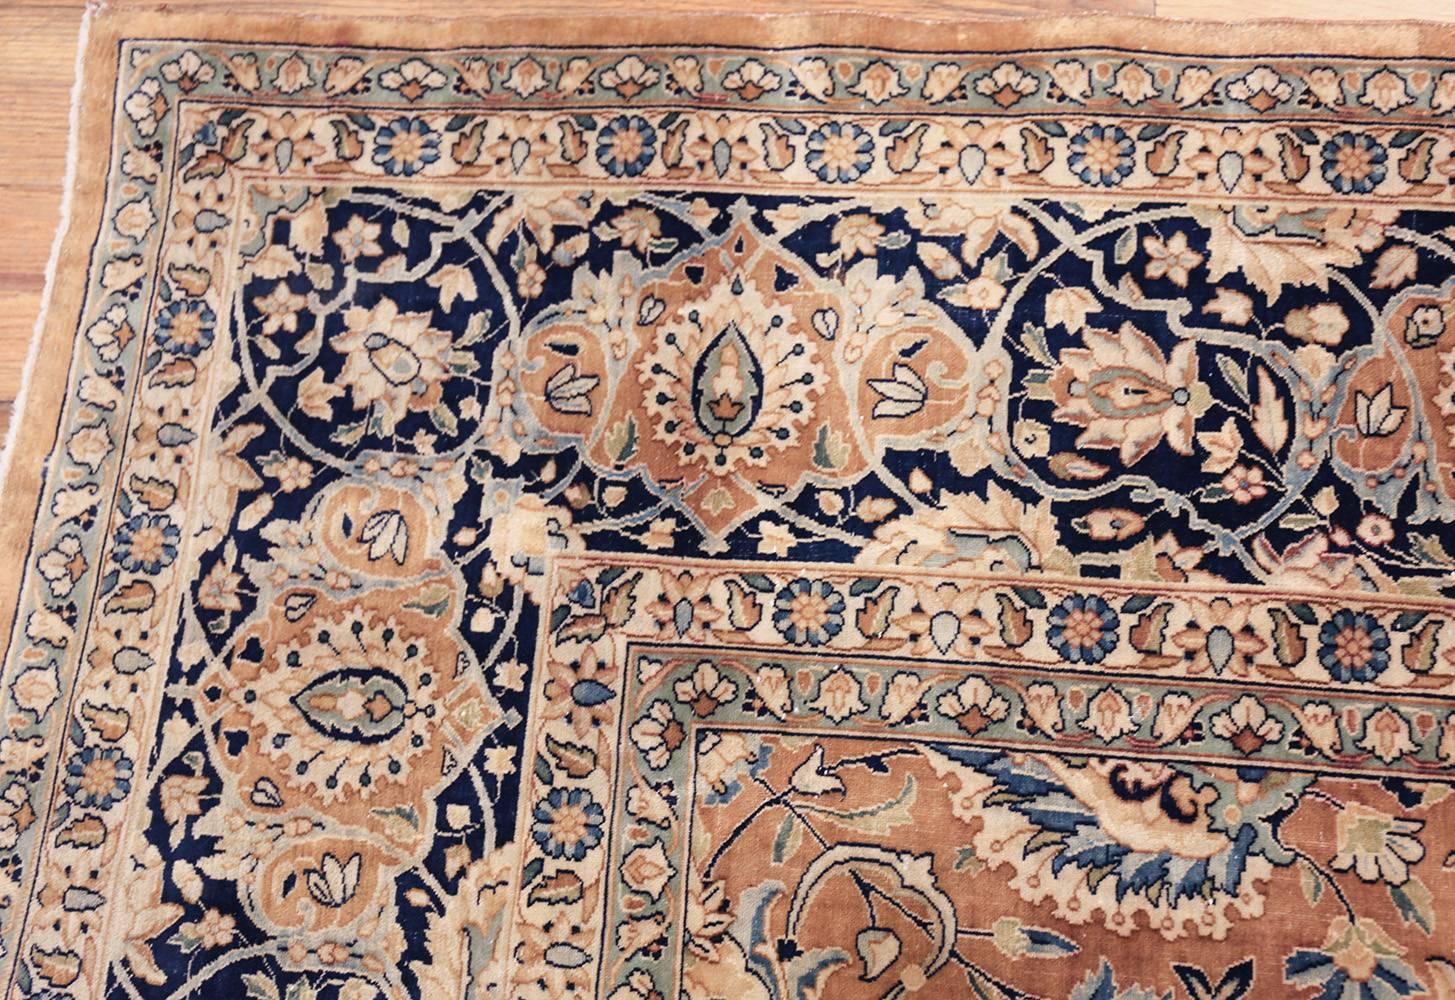 Hand-Knotted Antique Persian Kerman Carpet 